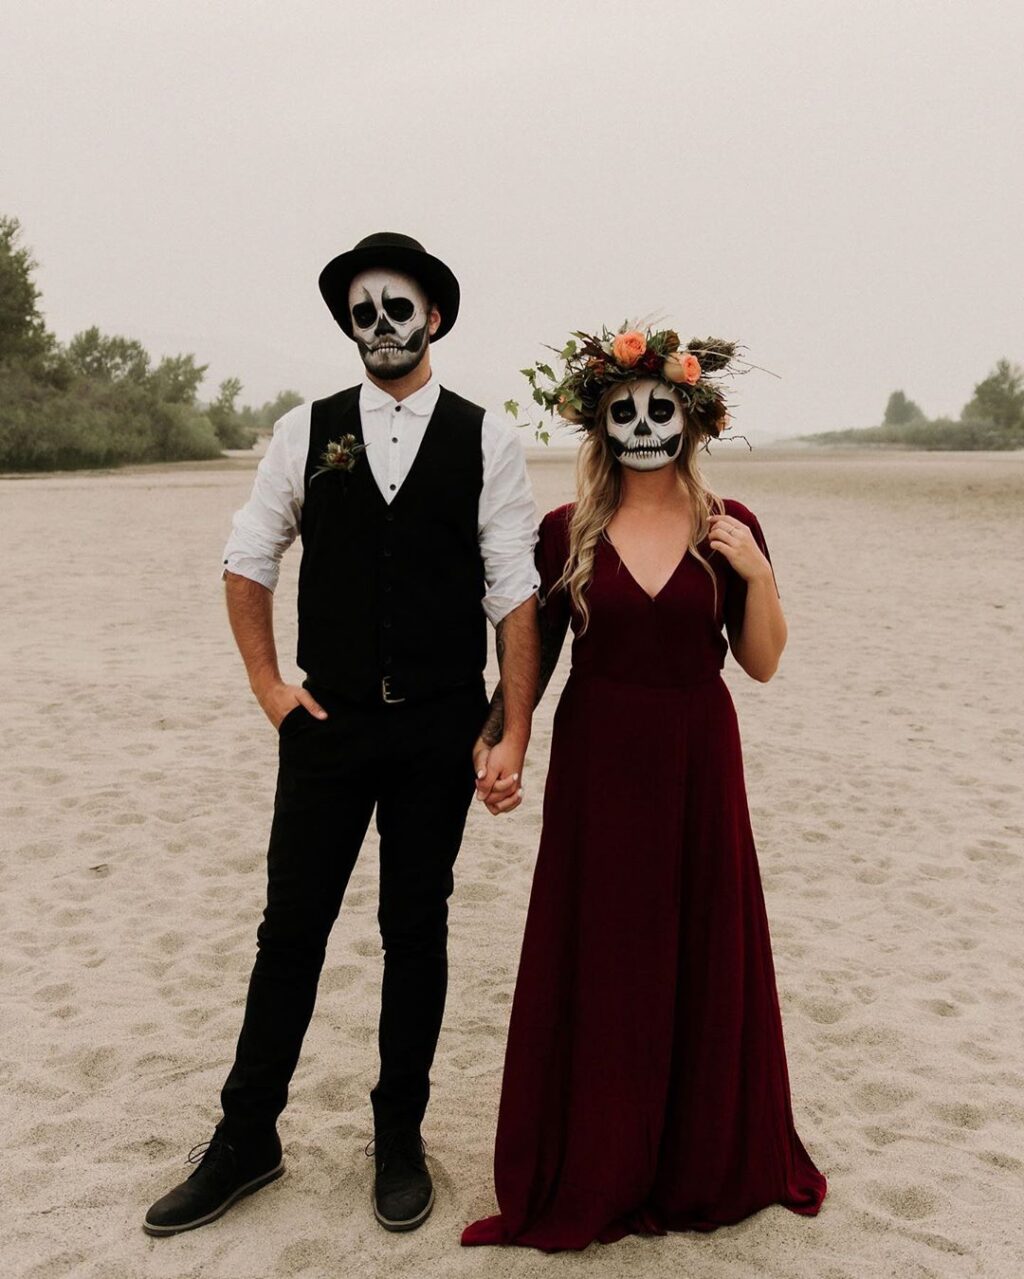 The 20 Best Couples Halloween Costume Ideas for 2021 - Wonder Forest